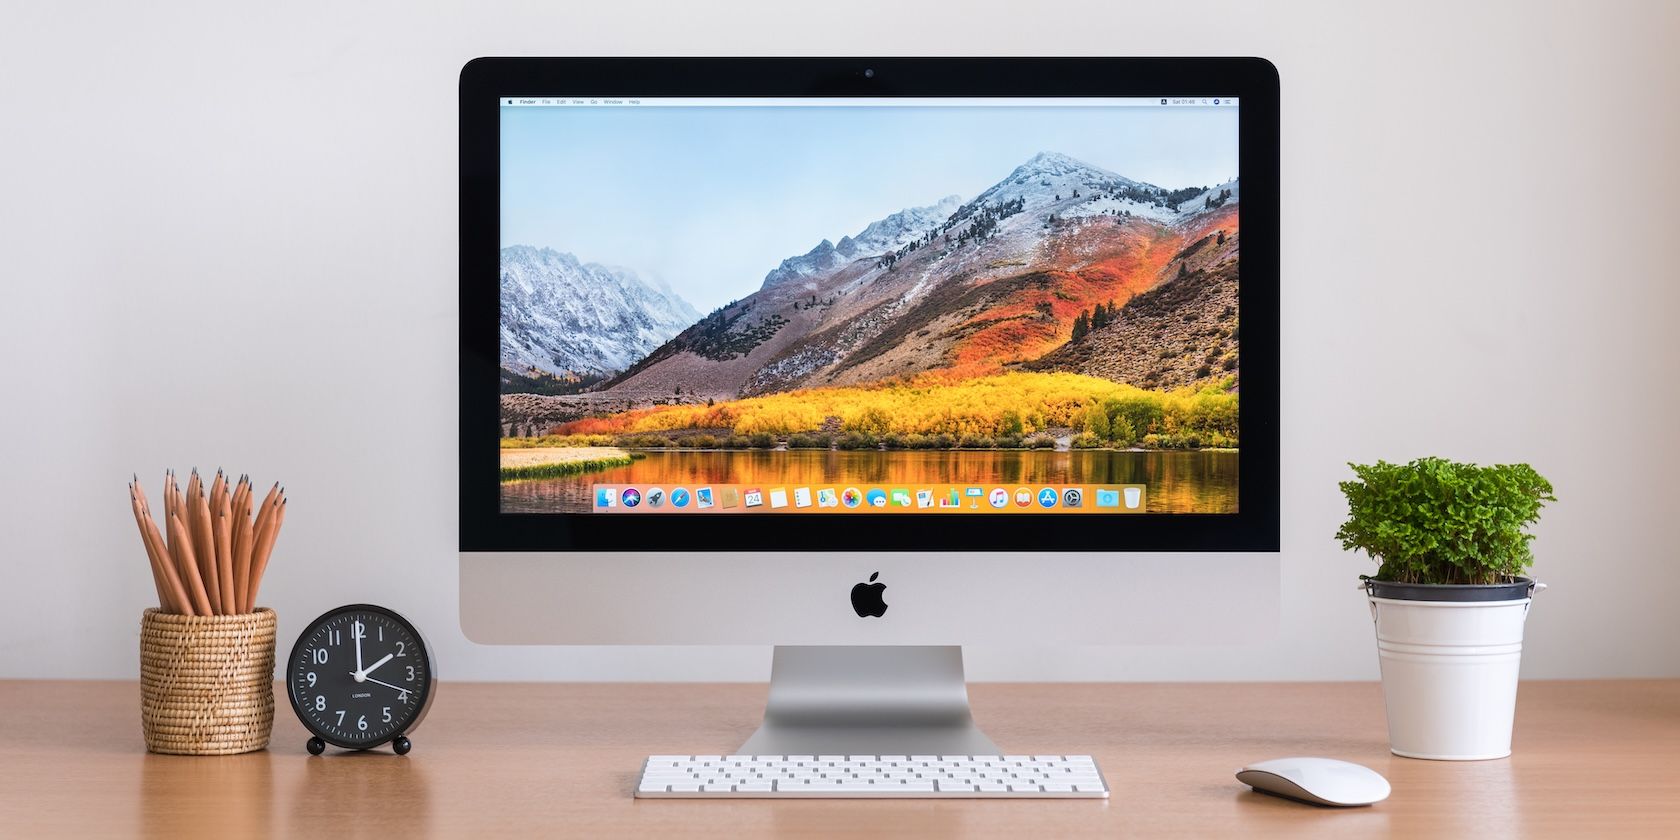 An iMac, showing the default macOS wallpaper, on a desk alongside a clock, pencil holder, plant, keyboard, and mouse.